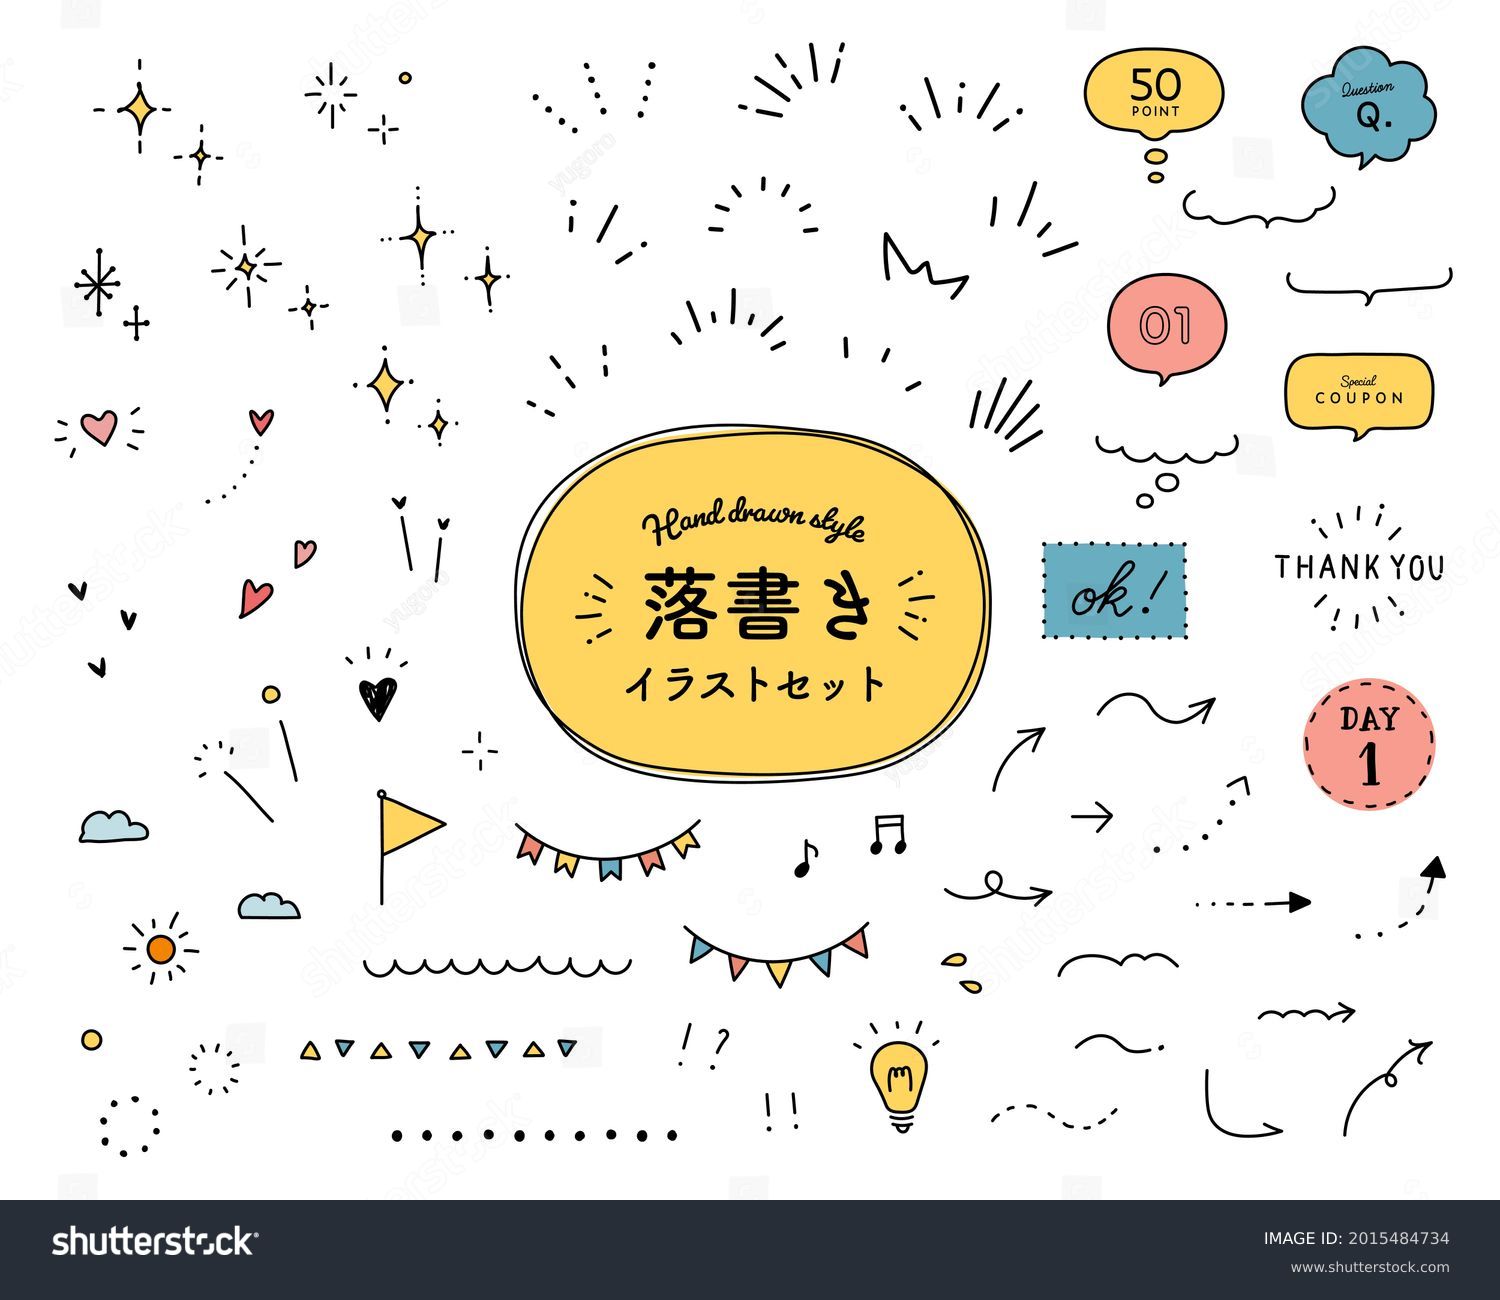 A set of doodle illustrations. The Japanese word means the same as the English title.
The illustrations have elements of doodles, stars, sparkles, hearts, decorations, frames, speech bubbles, arrows. #2015484734